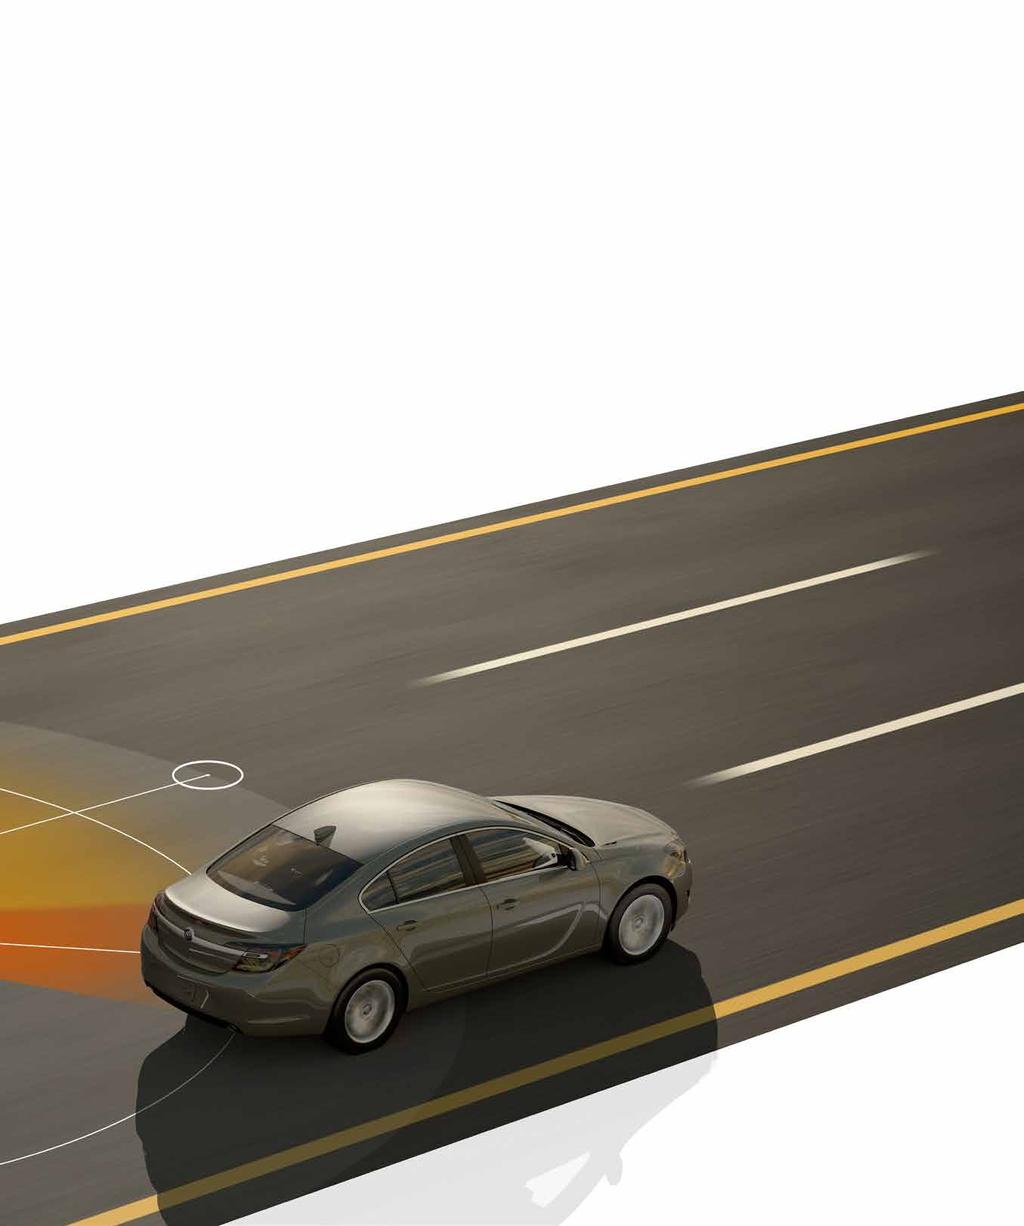 AVAILABLE SAFETY TECHNOLOGIES 1 LANE DEPARTURE WARNING Provides alerts to help you avoid crashes due to unintentionally drifting out of your lane when your turn signal is not activated.